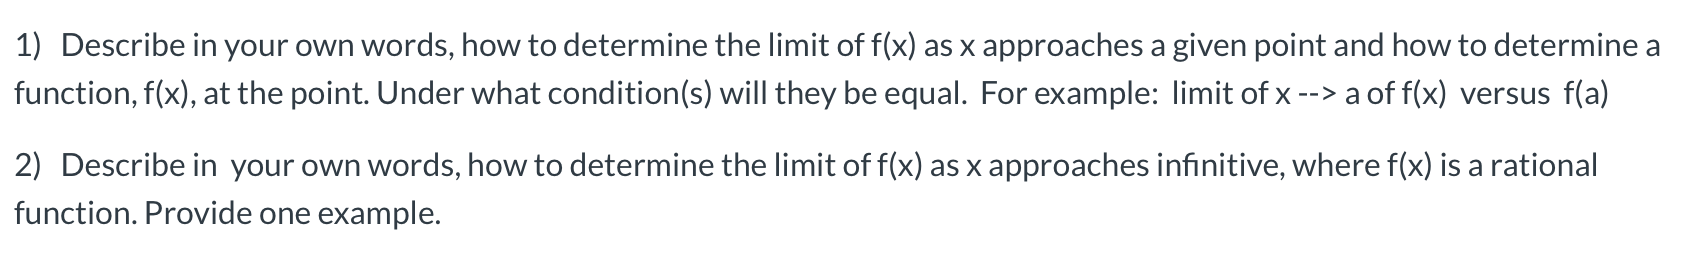 1) Describe in your own words, how to determine the limit of f(x) as x approaches a given point and how to determine a
function, f(x), at the point. Under what condition(s) will they be equal. For example: limit of x --> a of f(x) versus f(a)
